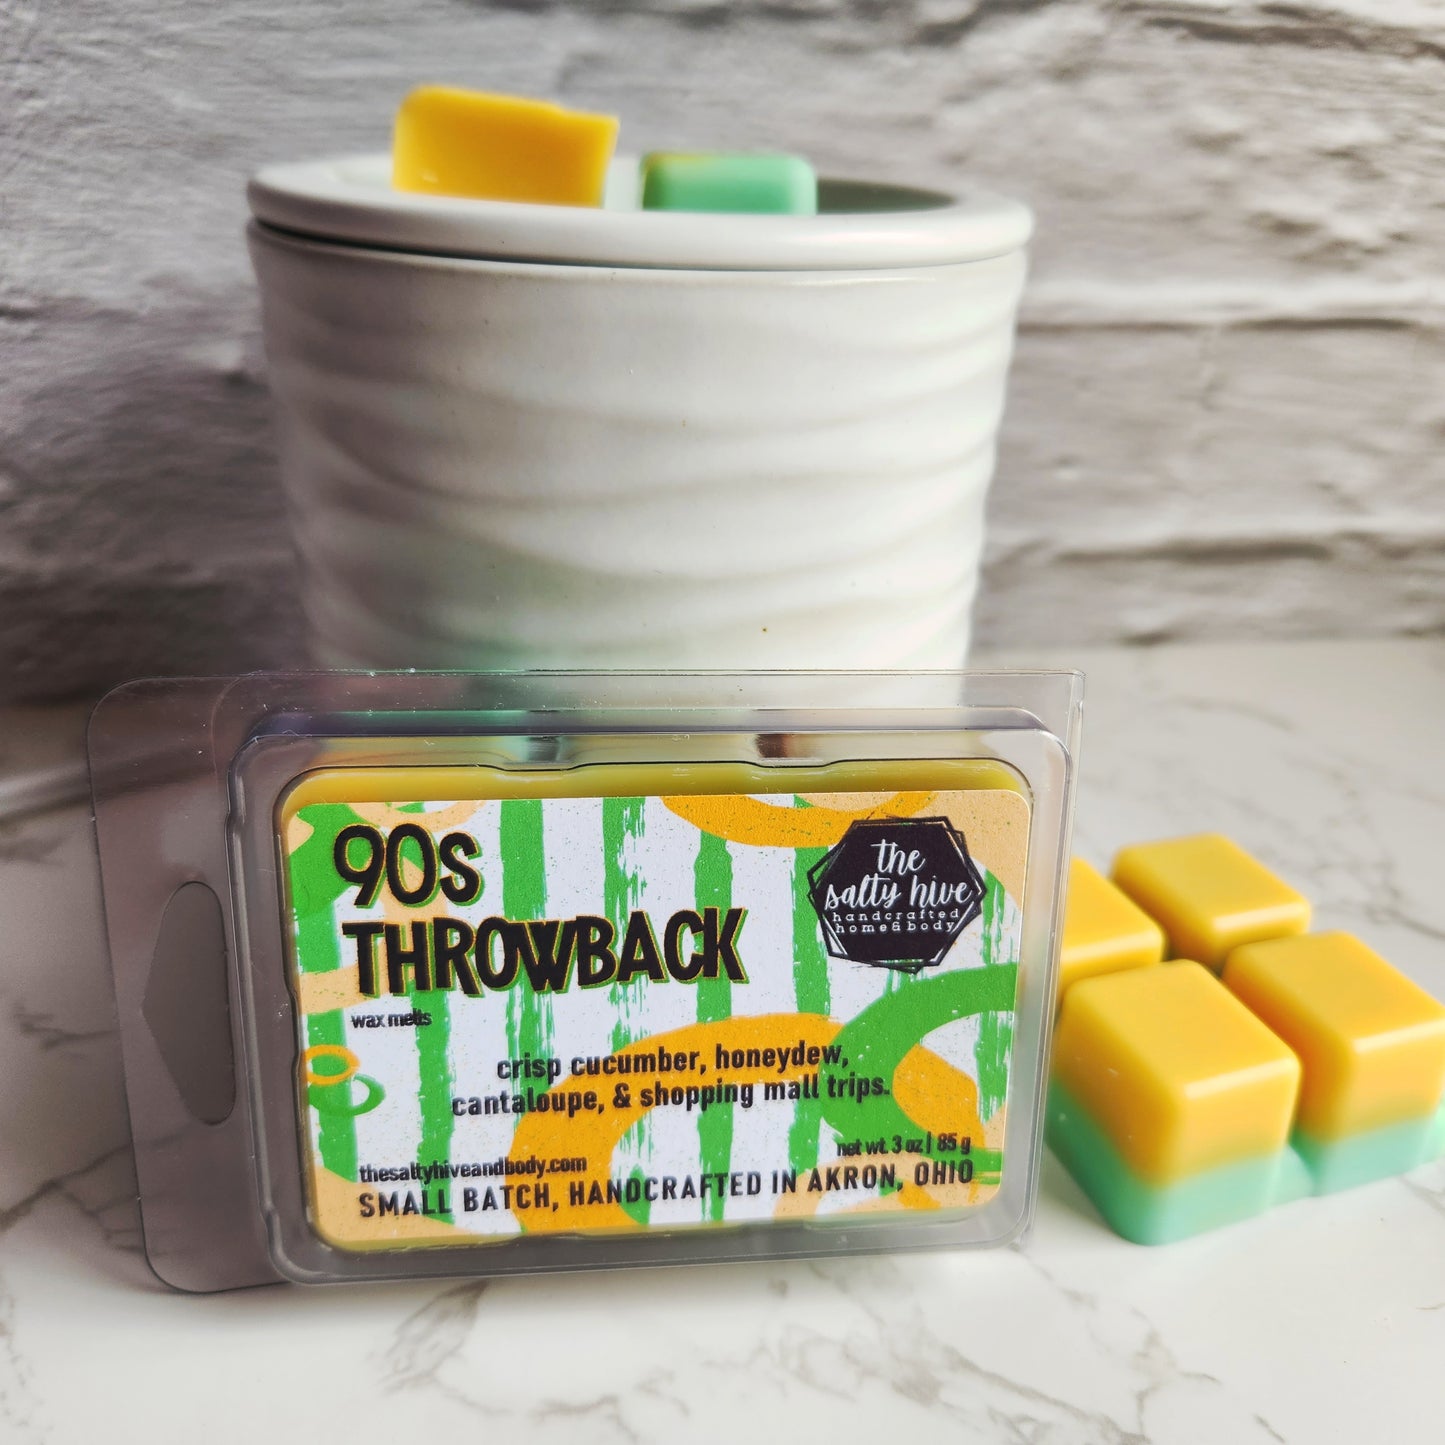 90s throwback wax melts - the salty hive